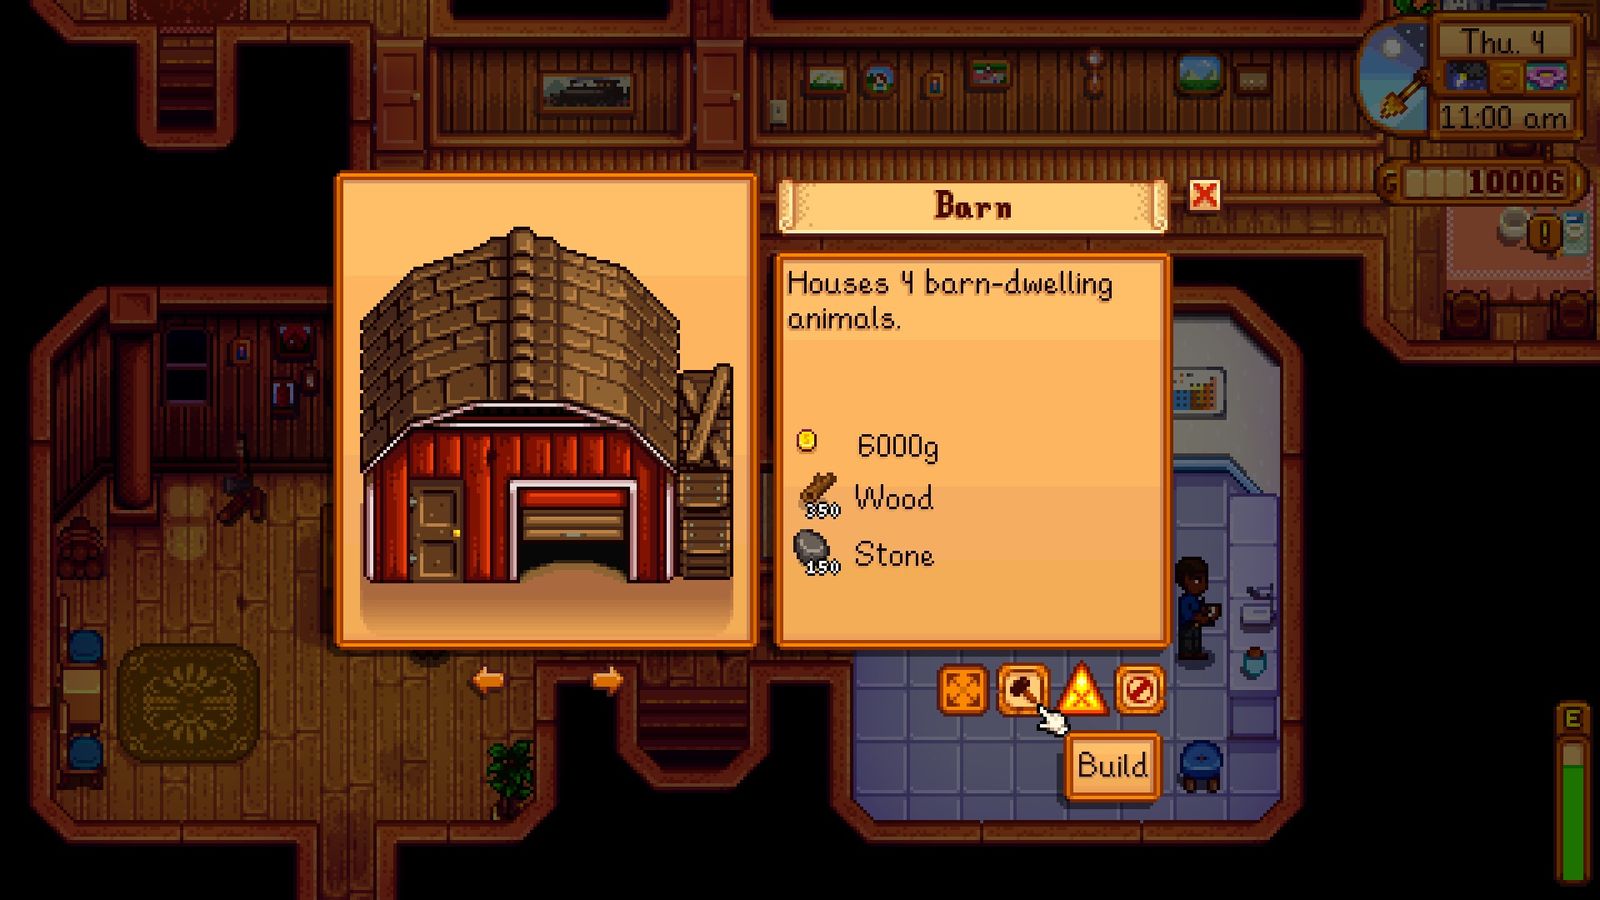 Stardew Valley build a barn to house animals